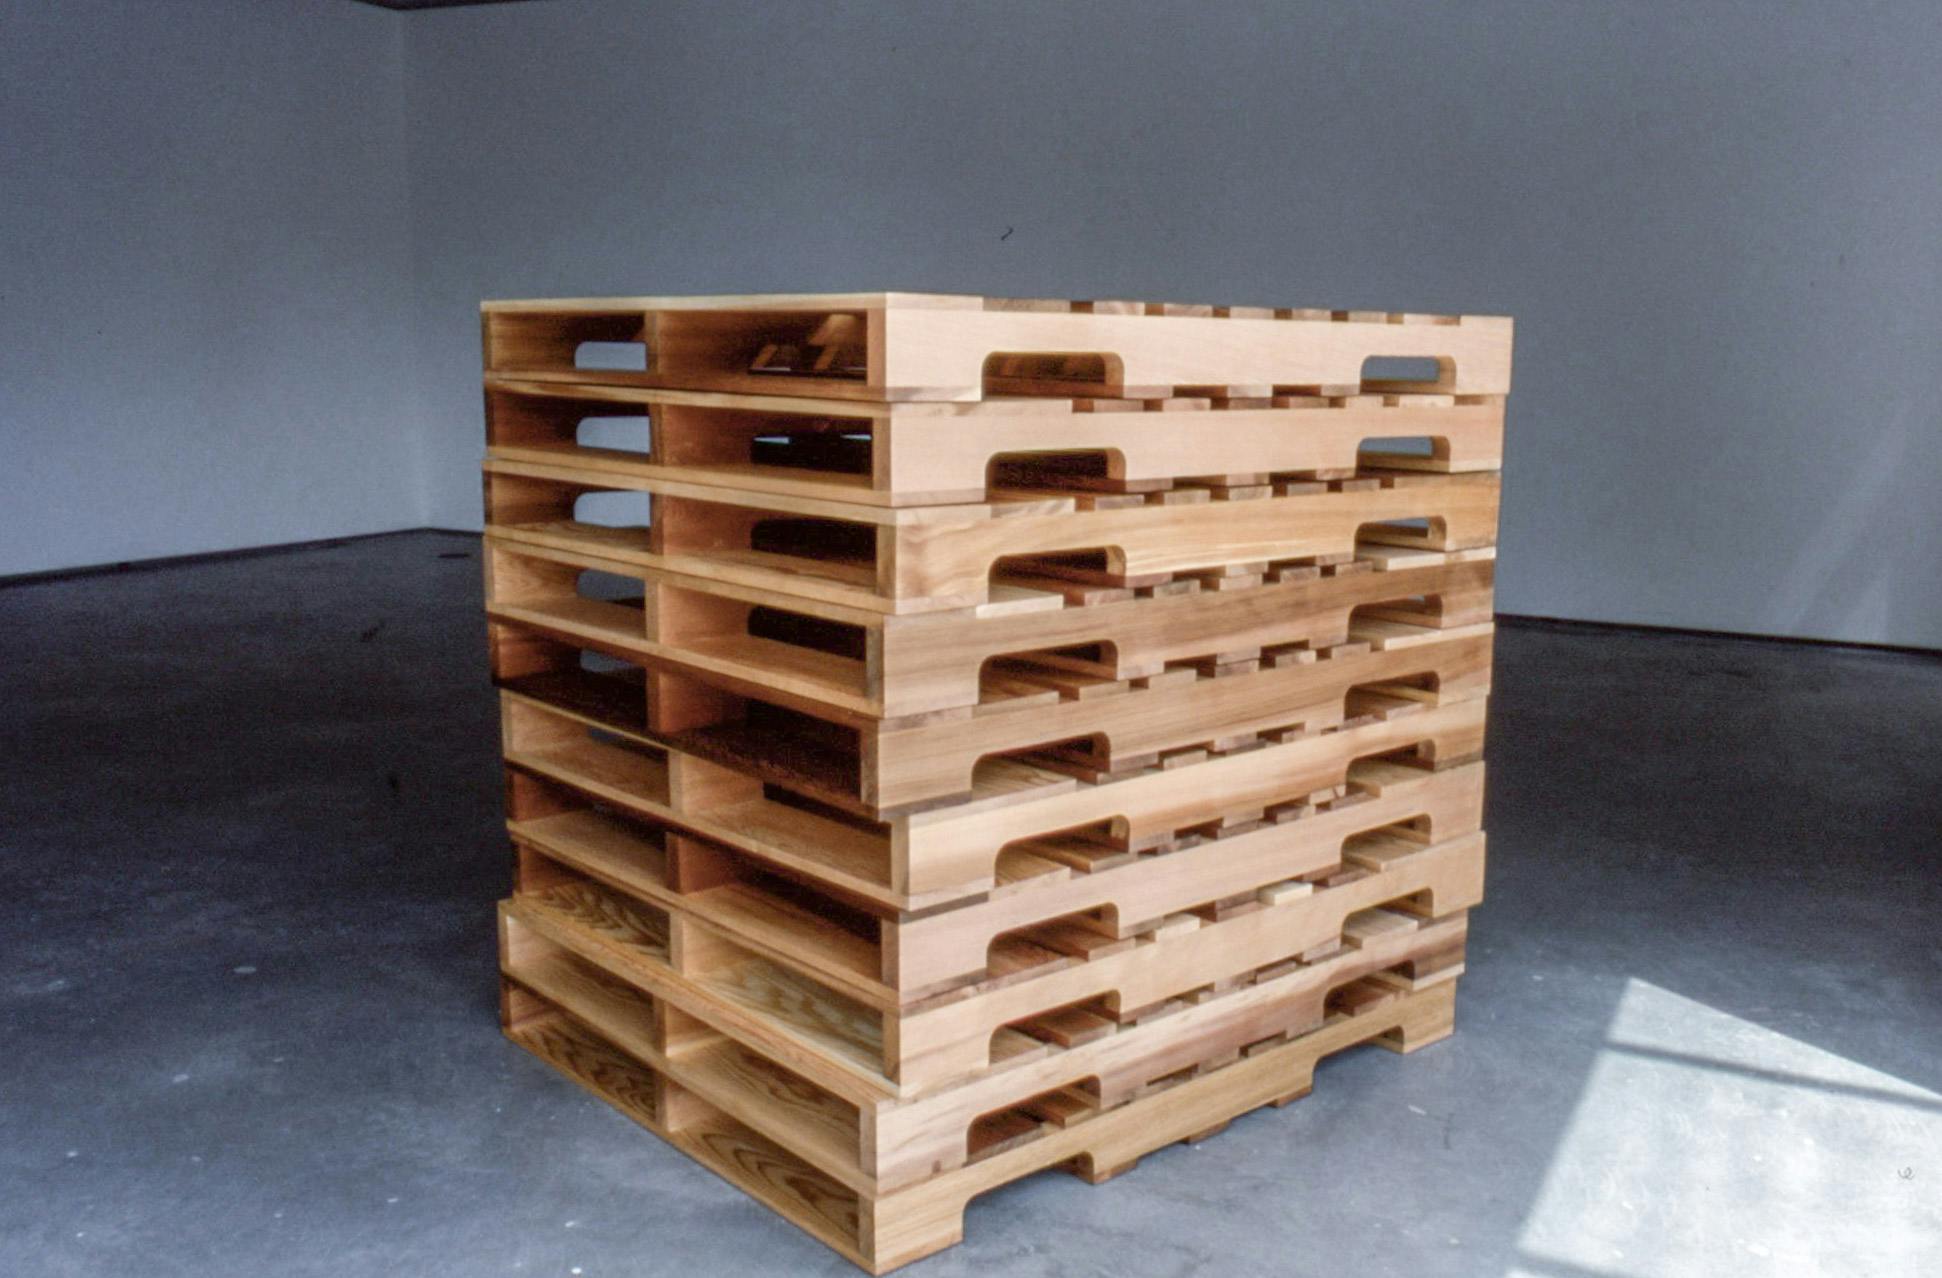 A stack of ten wood pieces, which look like large duckboards, is installed in the middle of a gallery space. They are identical in shape and size. None of them are painted. 